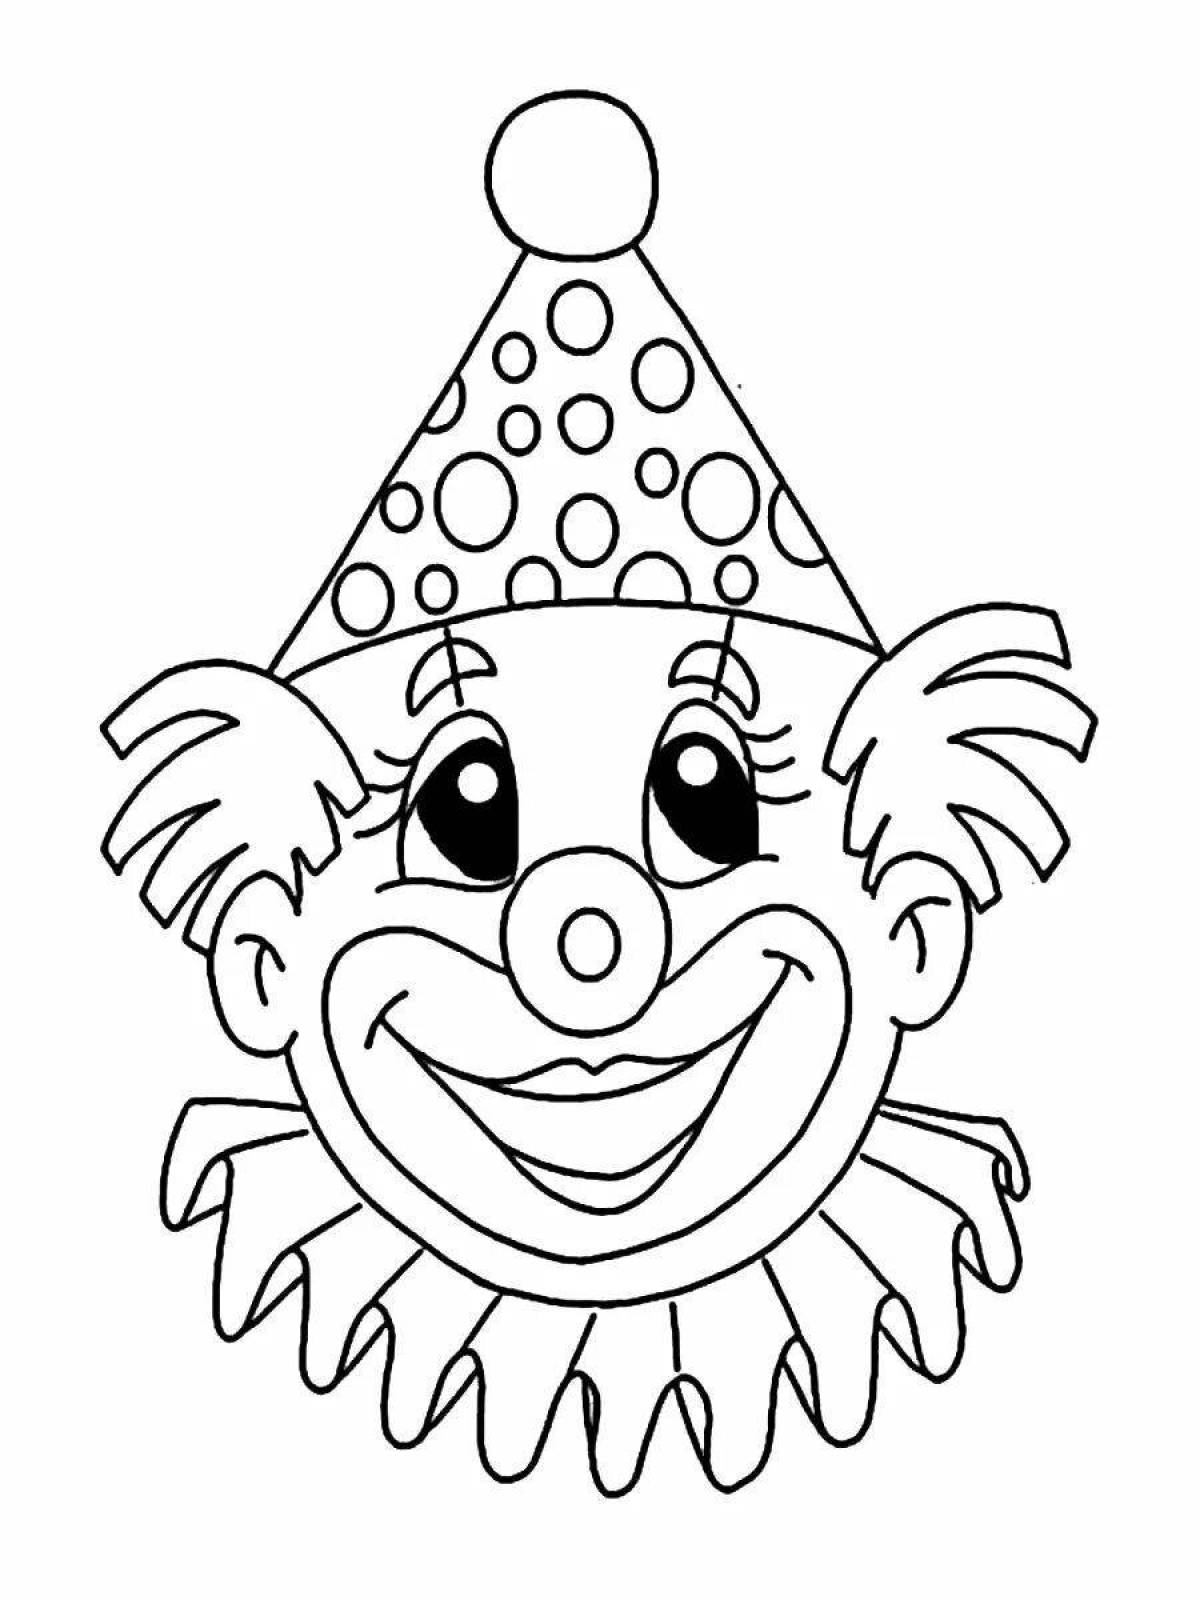 Mystical clown face coloring page